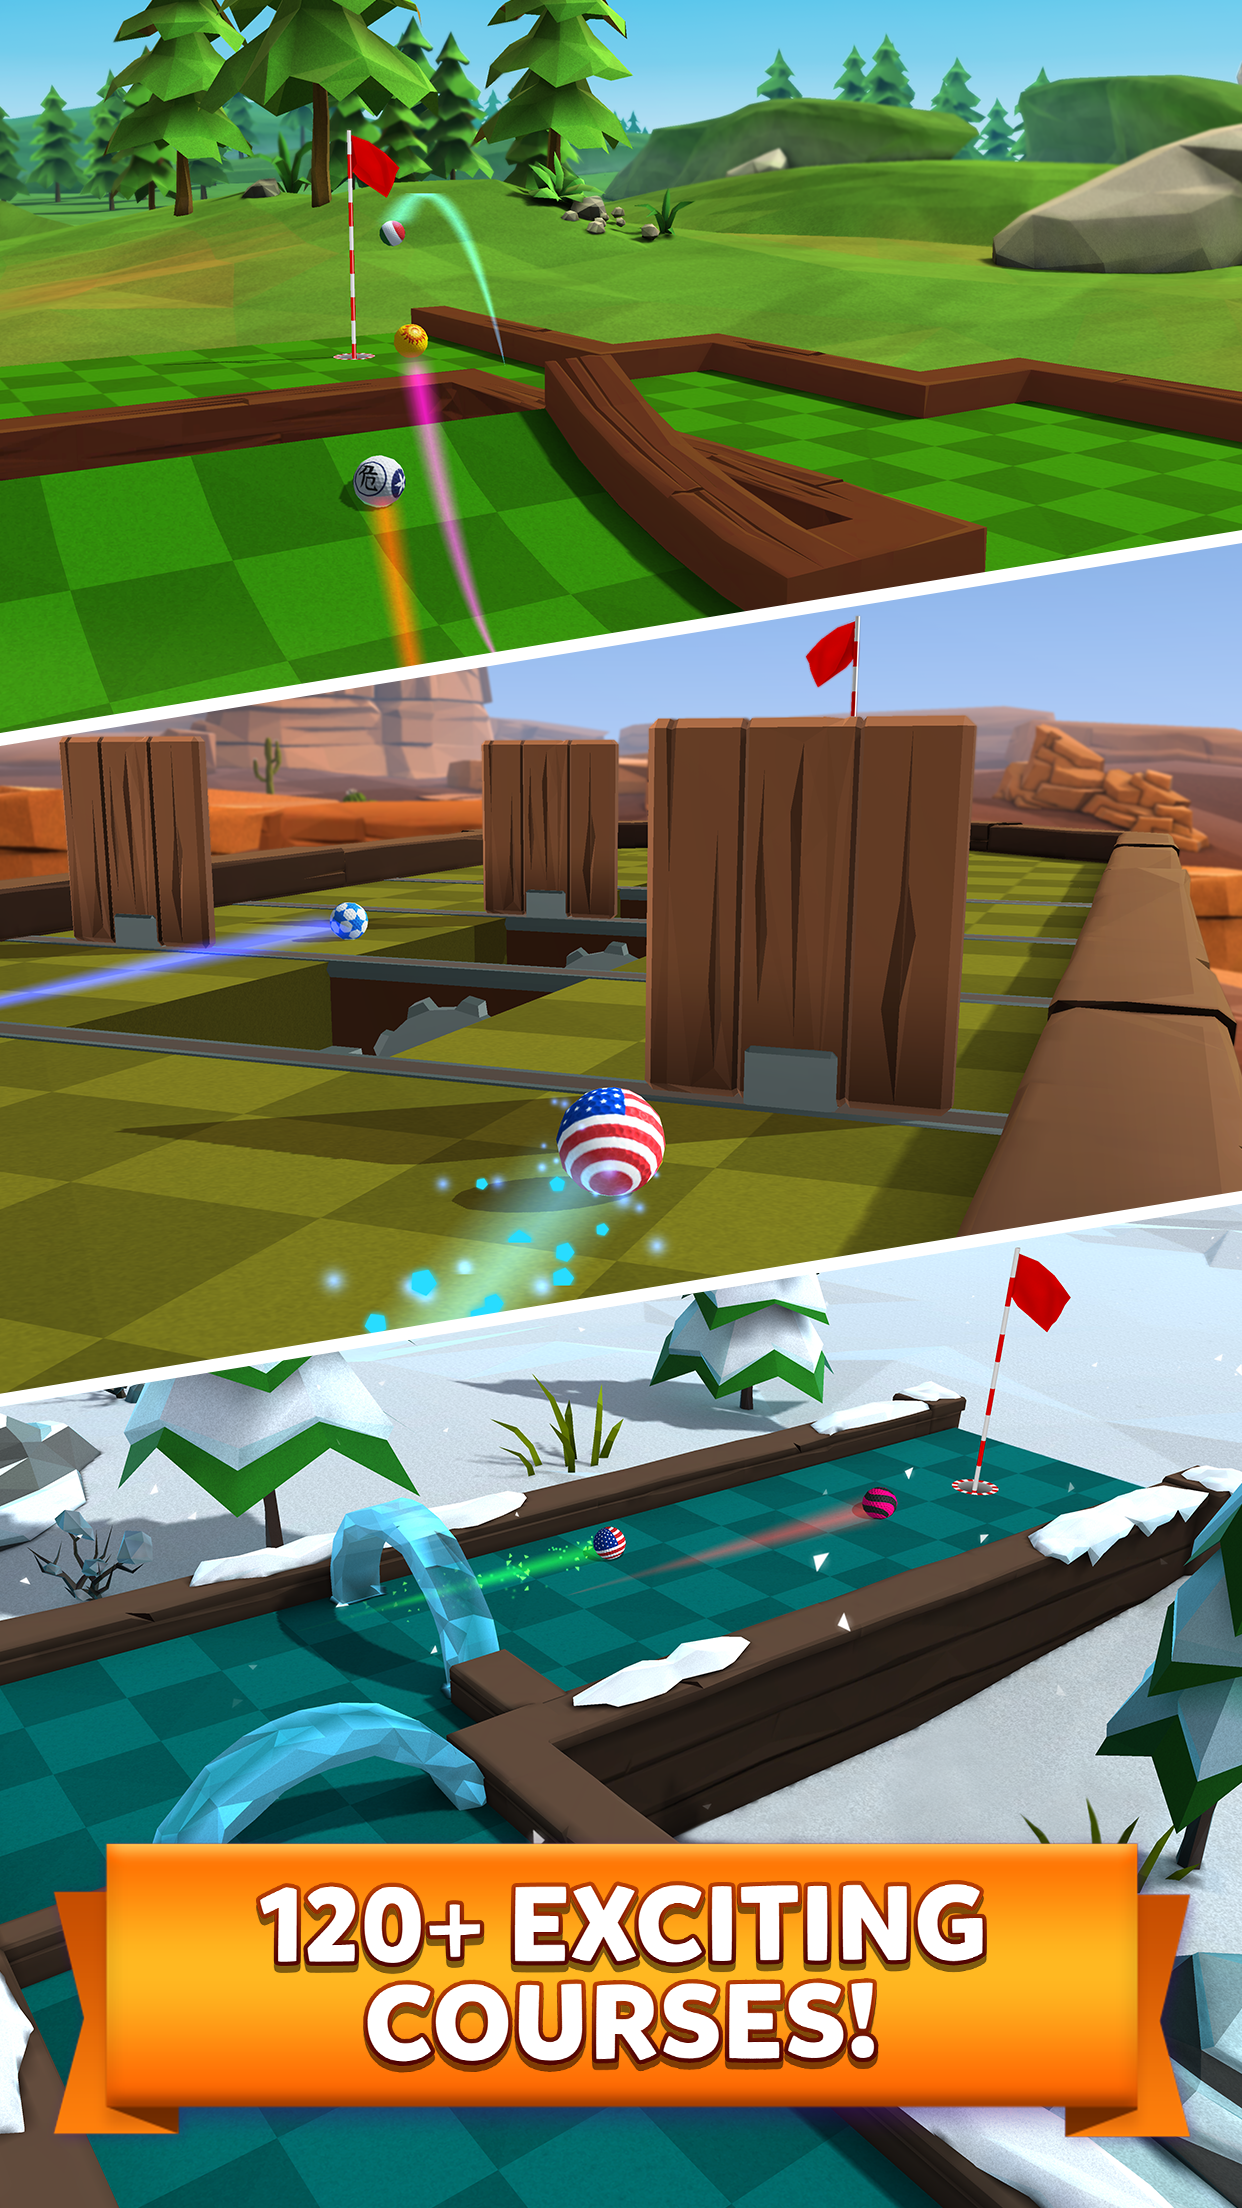 Section 5: Various Game Modes and Courses in Golf Battle